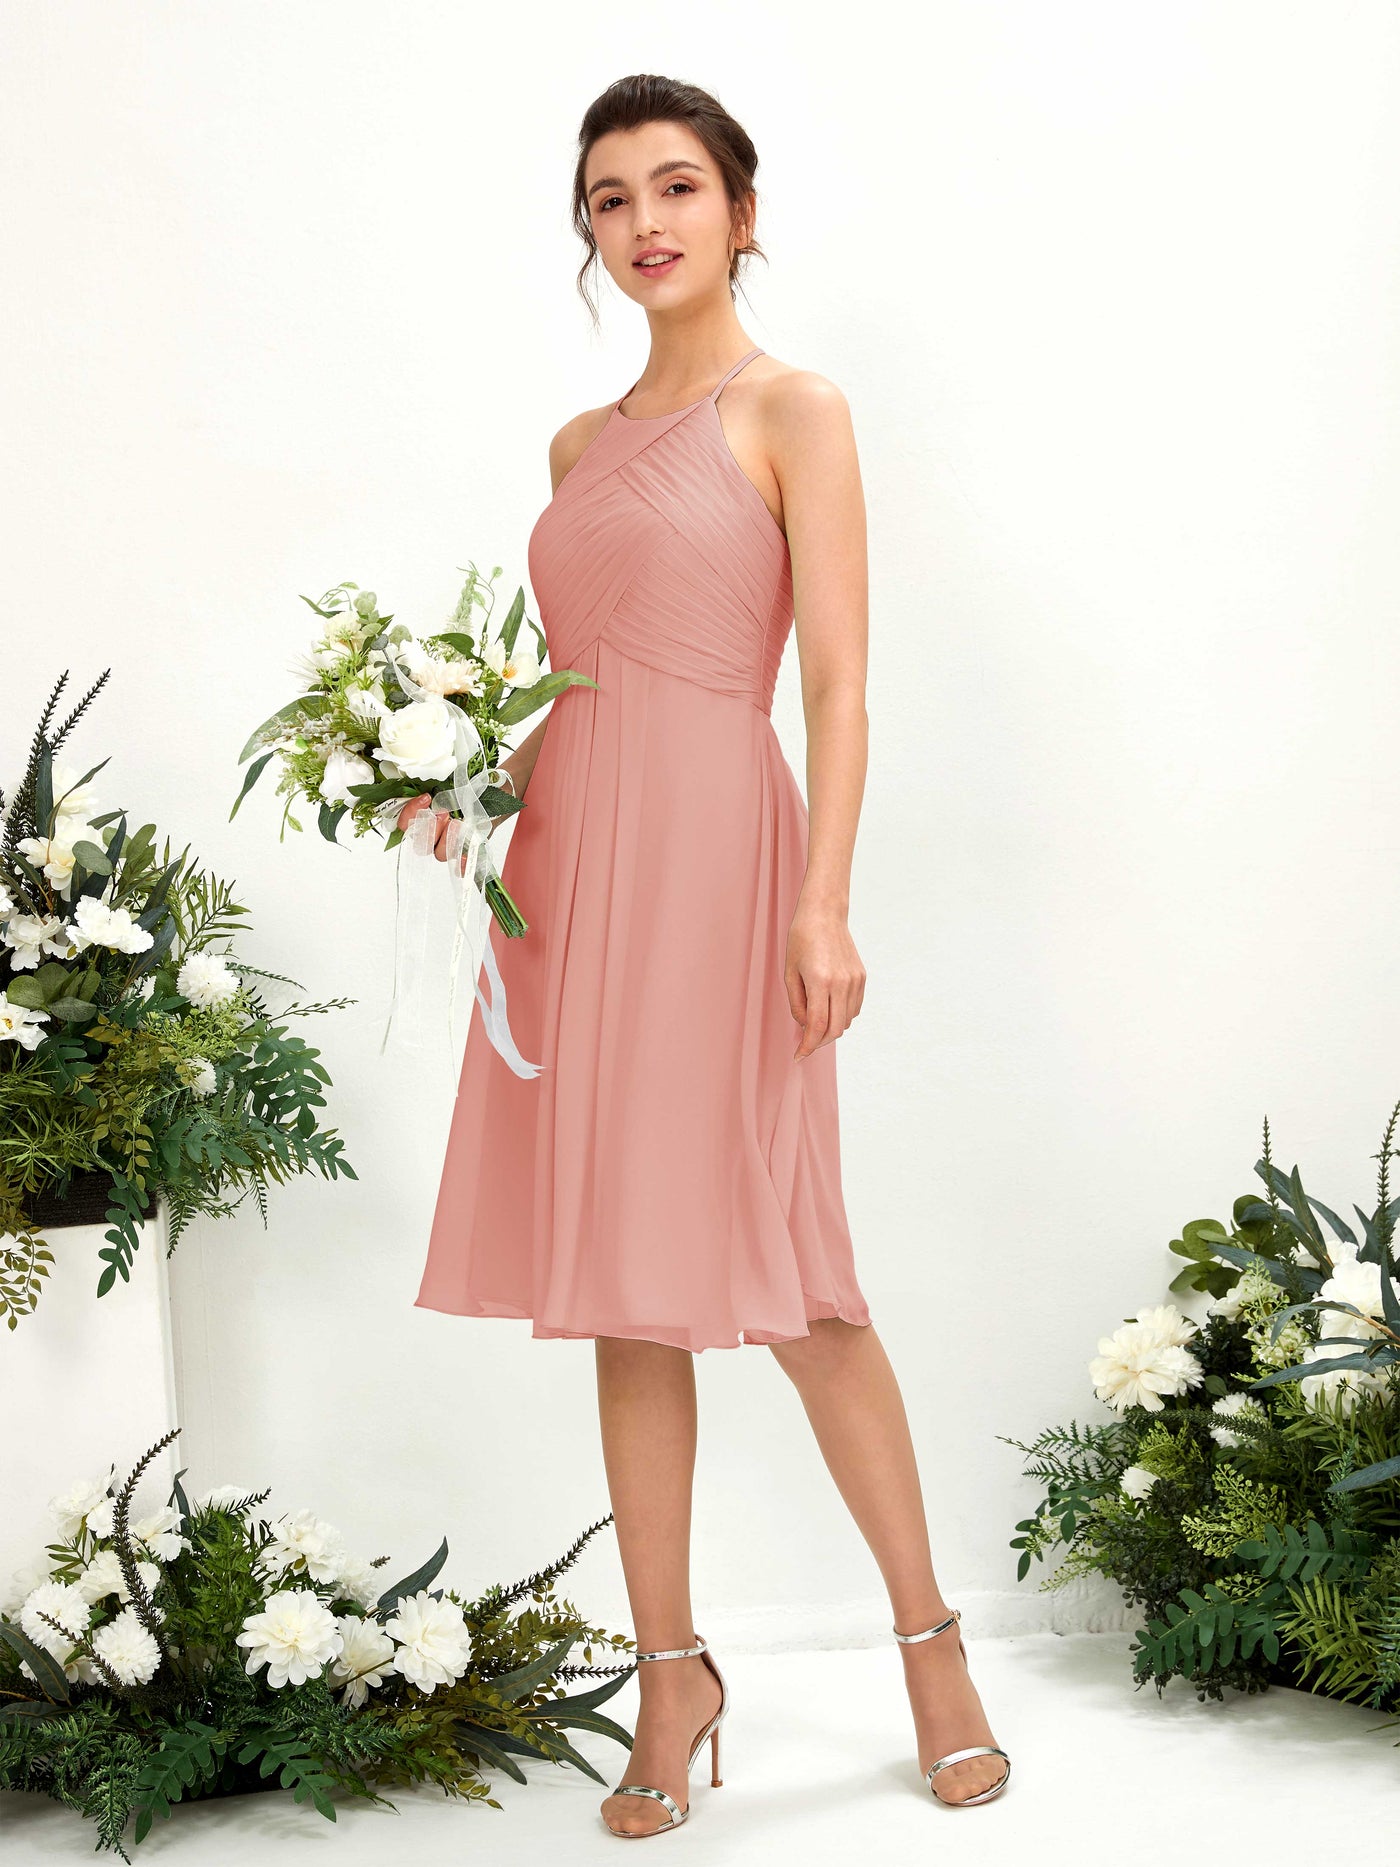 Champagne Rose Bridesmaid Dresses Bridesmaid Dress A-line Chiffon Halter Knee Length Sleeveless Wedding Party Dress (81220406)#color_champagne-rose